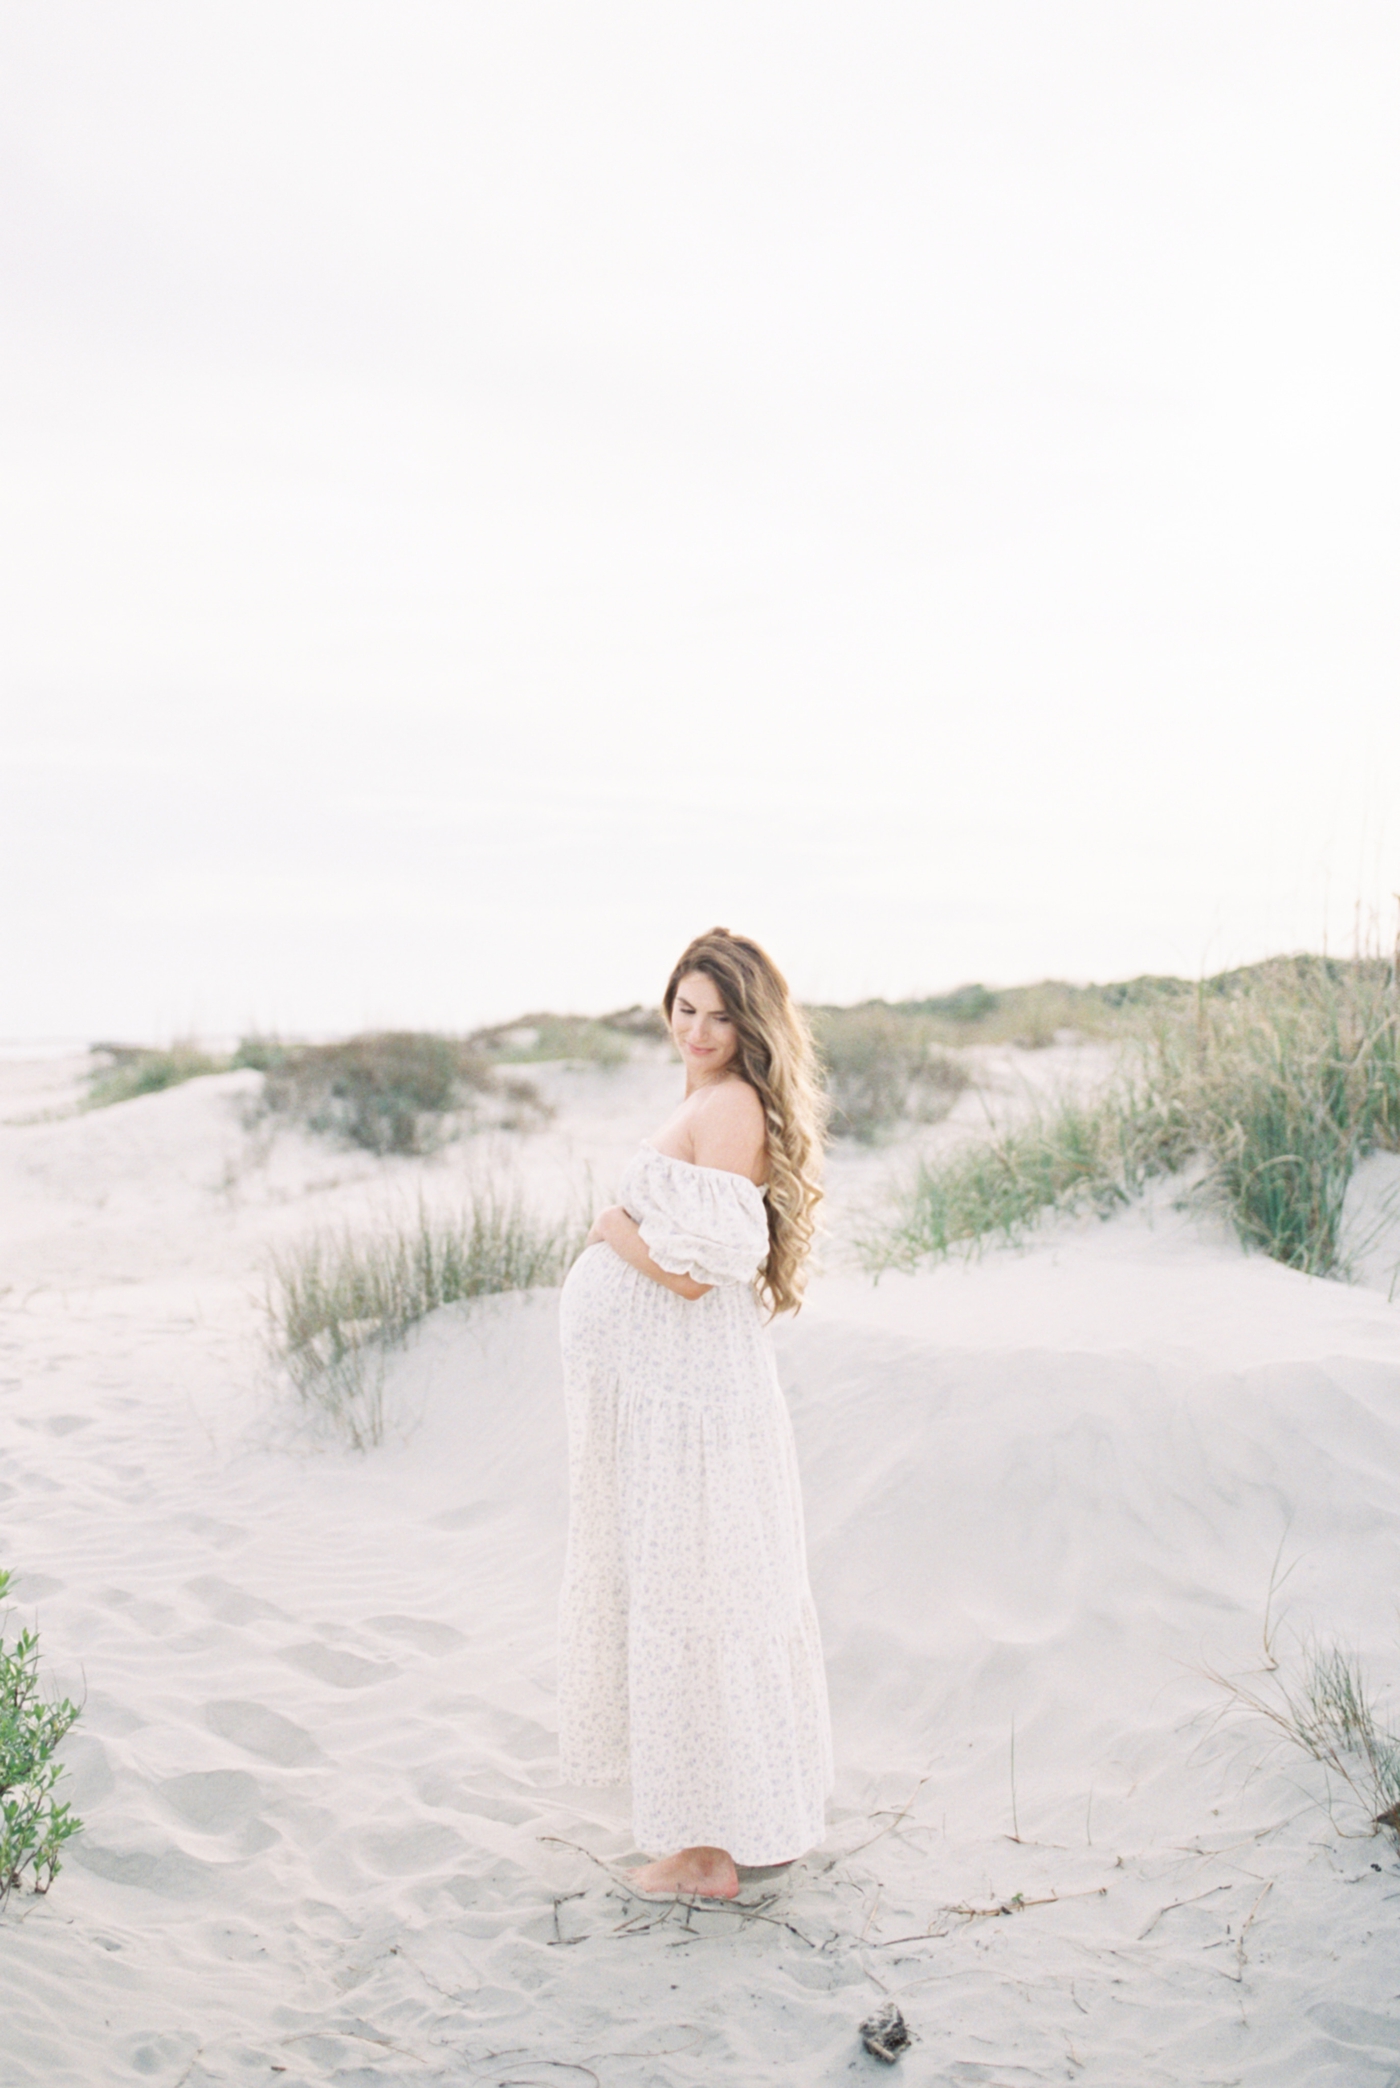 Mother to be in long white dress on Sullivans Island | Photo by Caitlyn Motycka Photography.